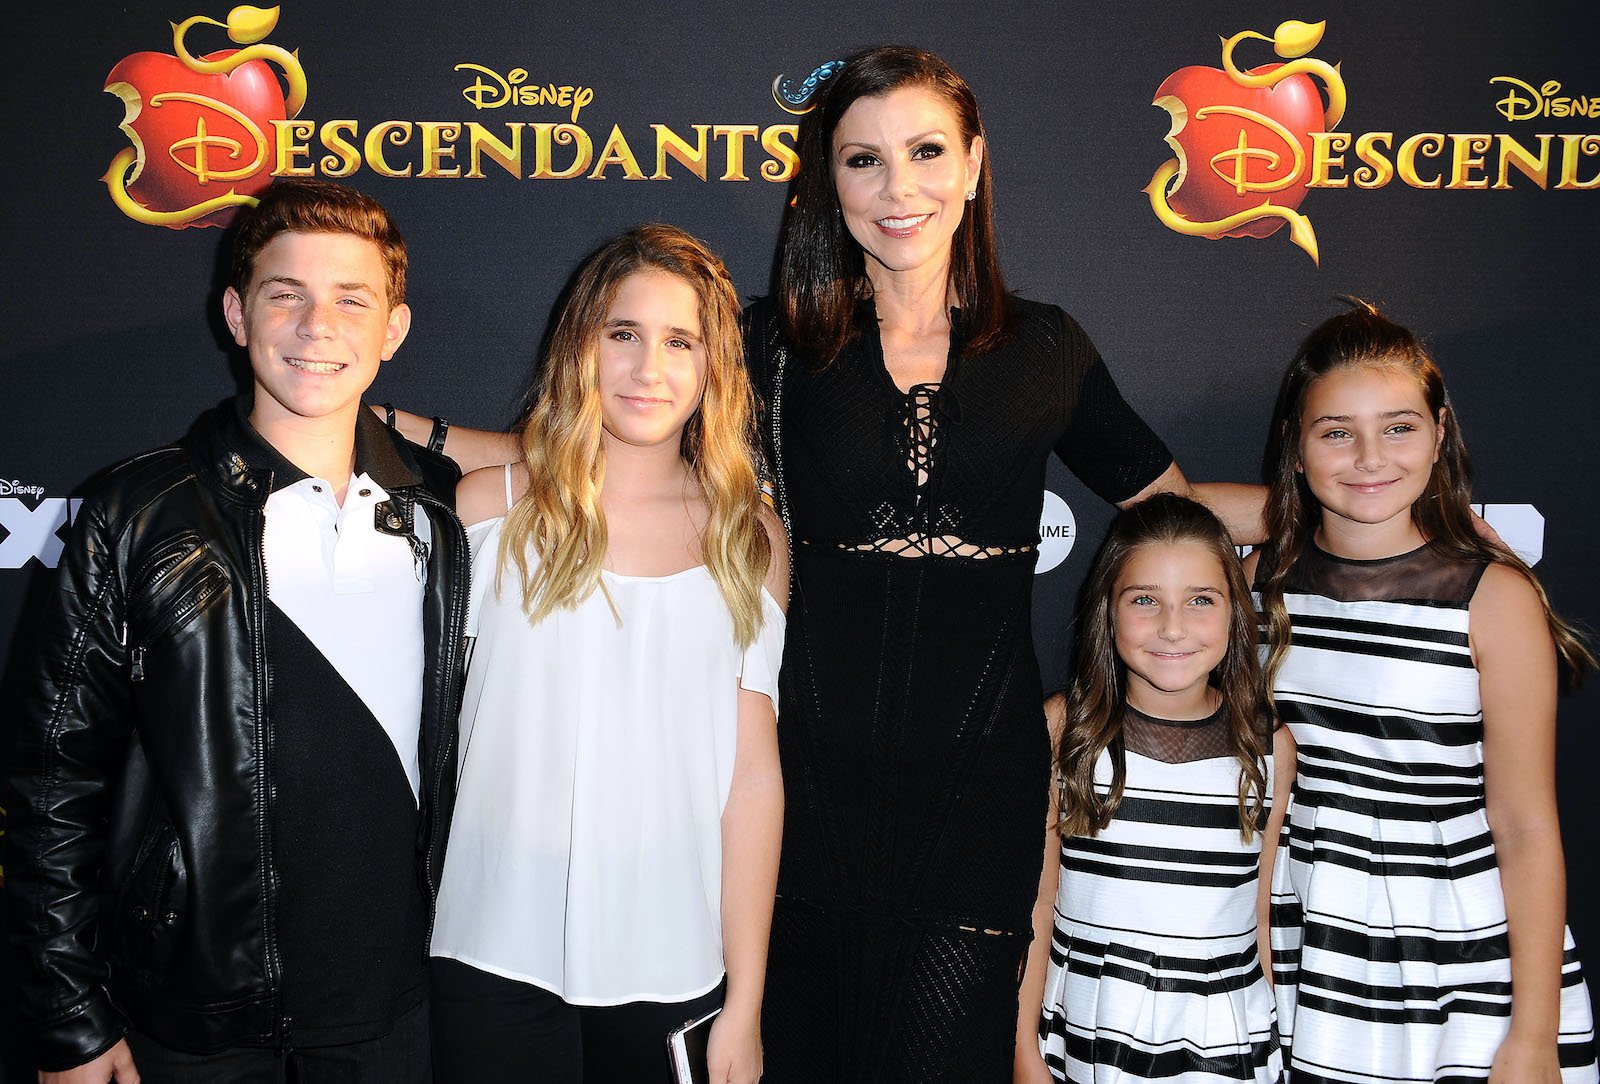 Heather Dubrow from RHOC and children attended a movie premiere in 2017